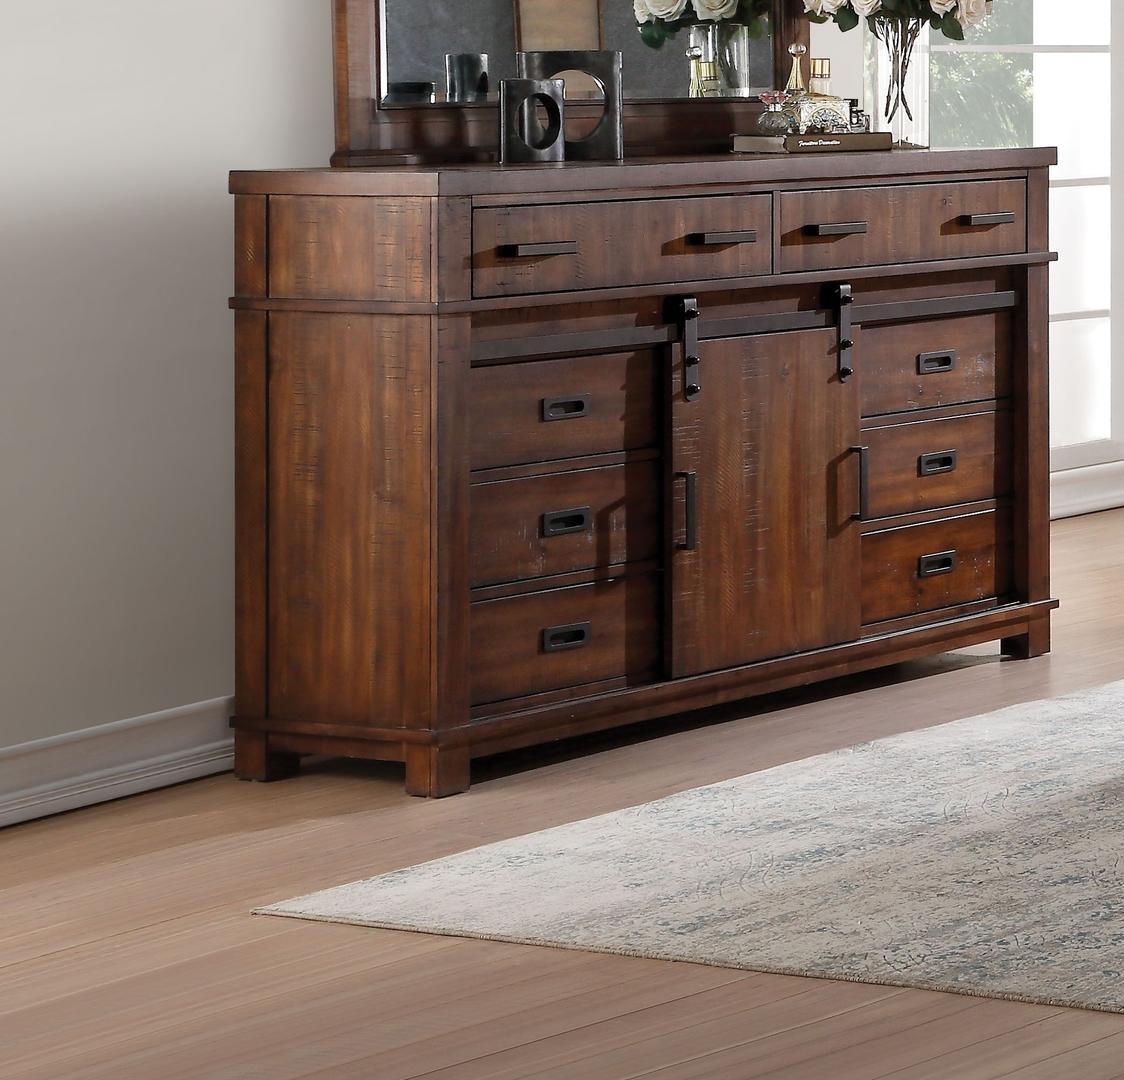 Contemporary, Traditional Combo Dresser Vibia Vibia-27165 in Cherry Finish, Brown 